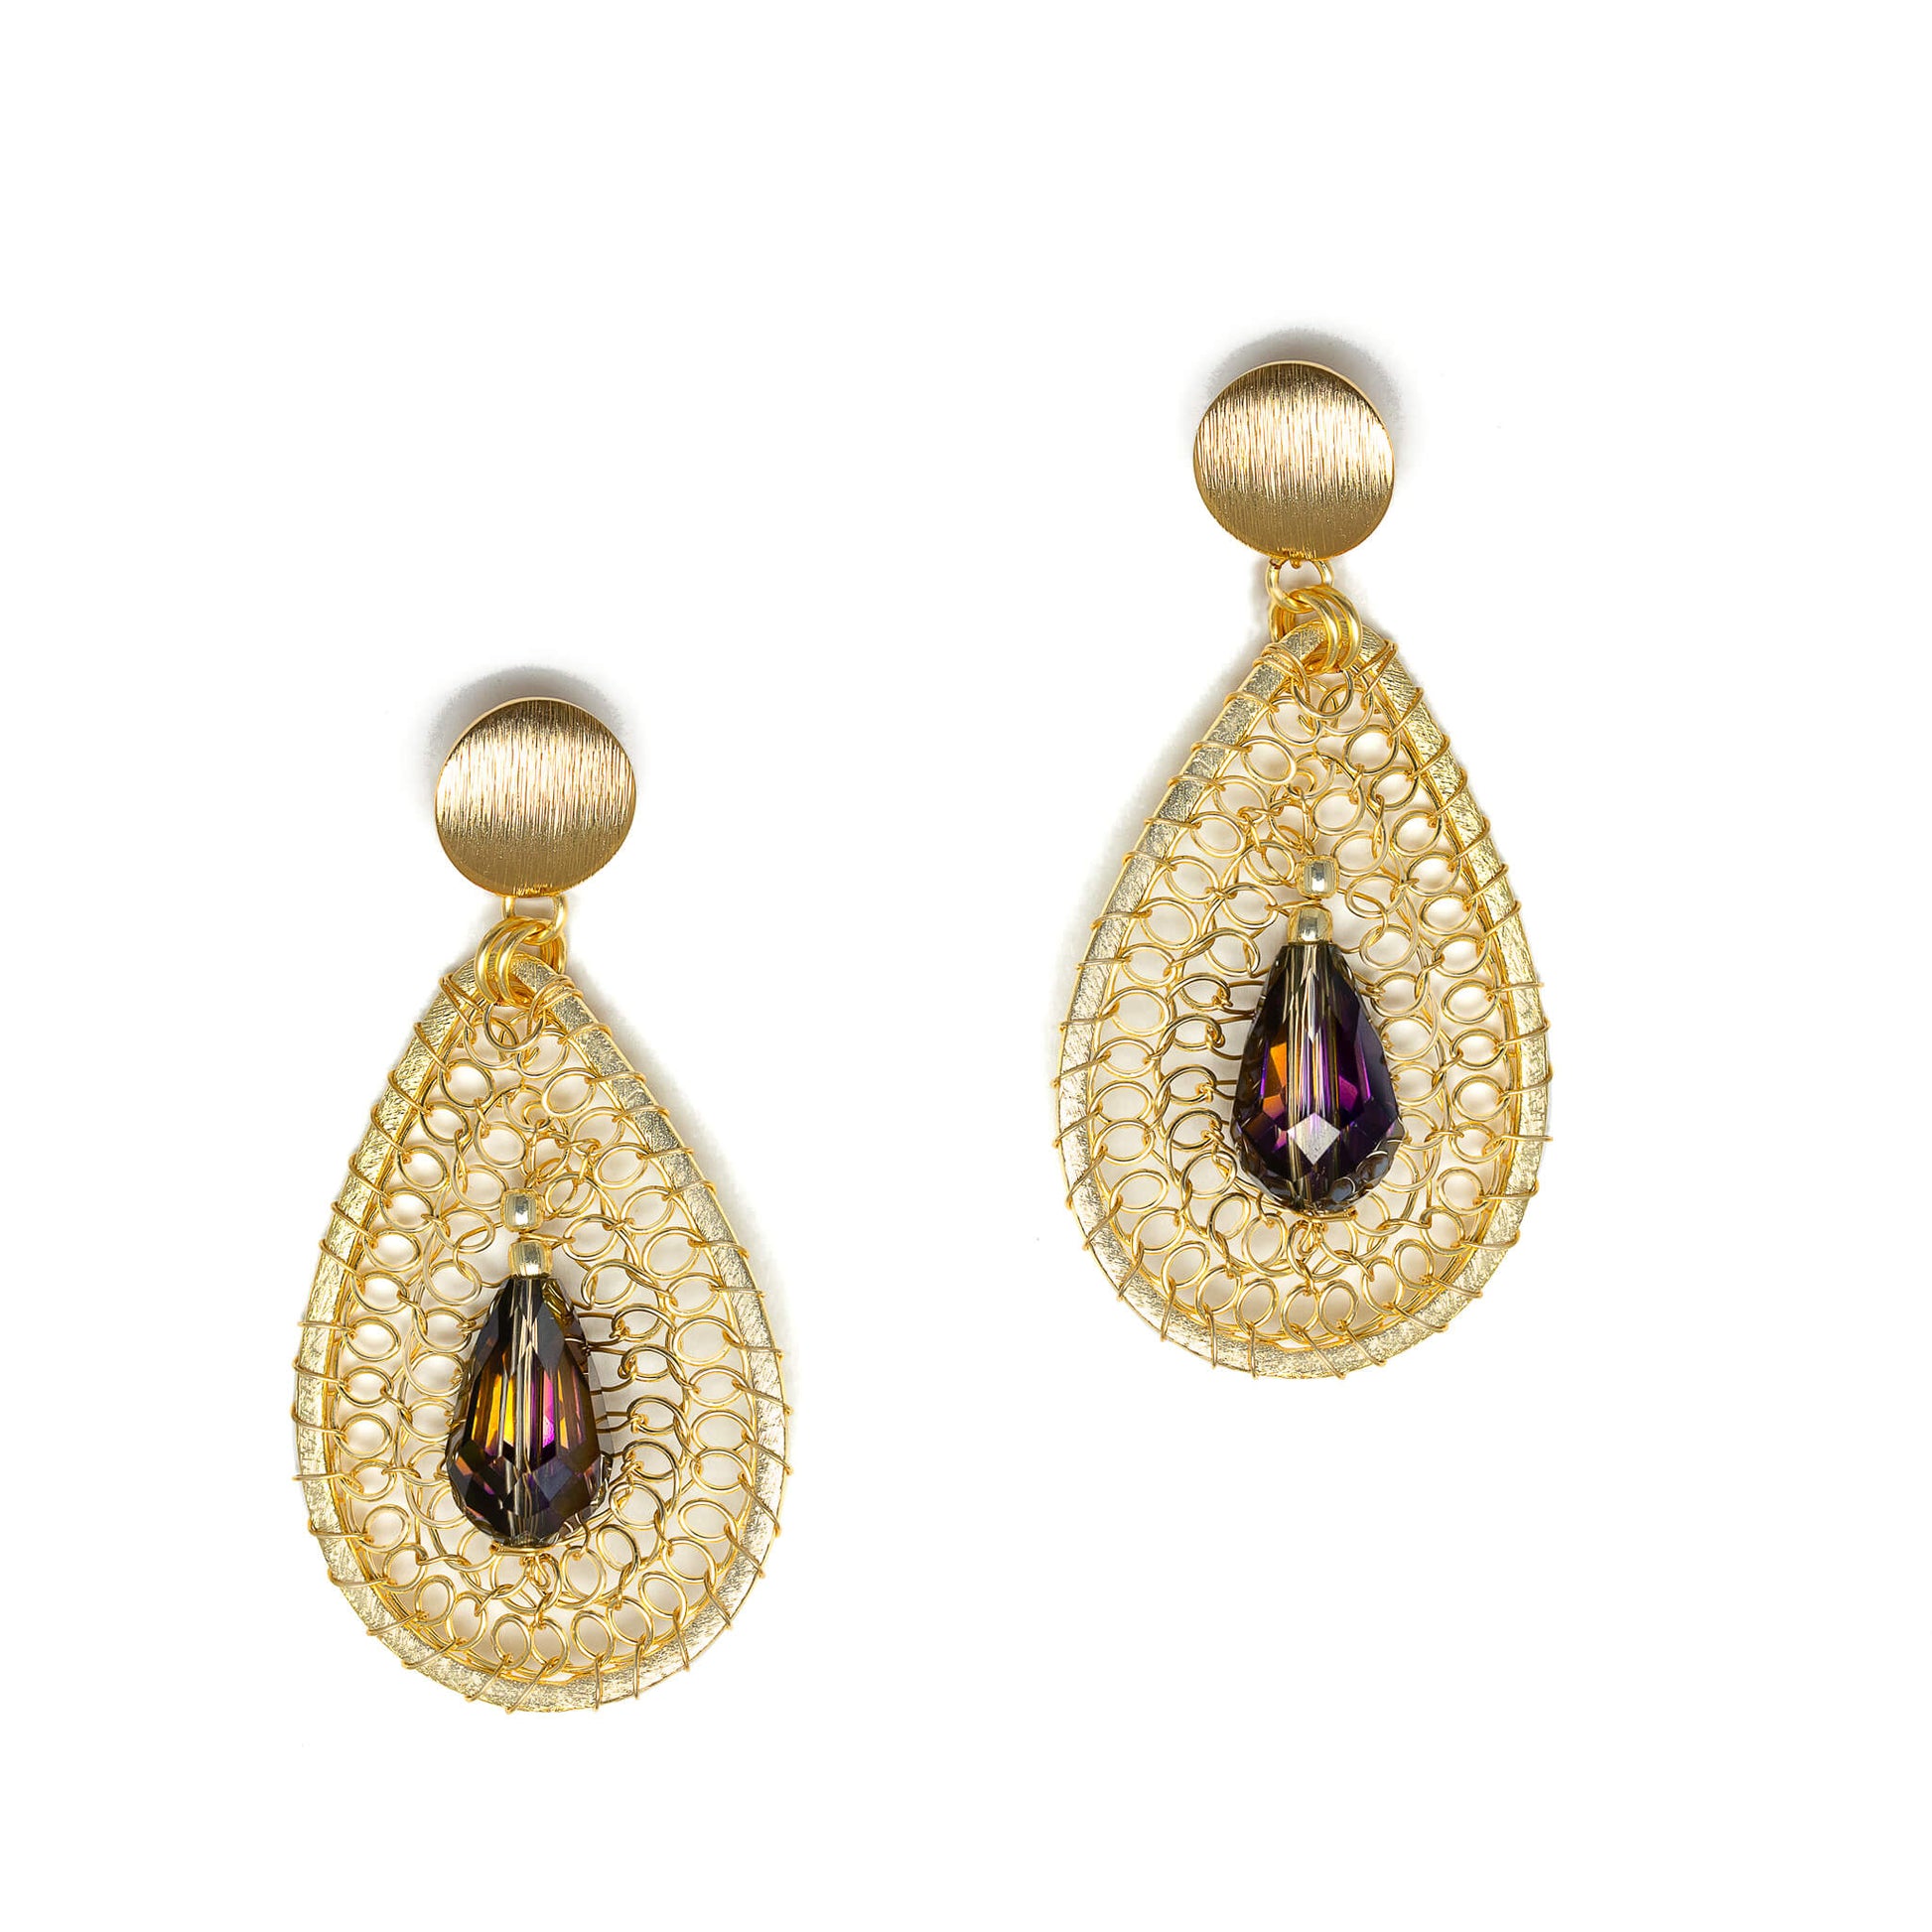 Devasshree dangle Earrings are 2.5 inches long. Gold and Purple earrings. Handmade with non-tarnish gold plated wire and Crystal Beads. Teardrop wire wrapped Earrings.